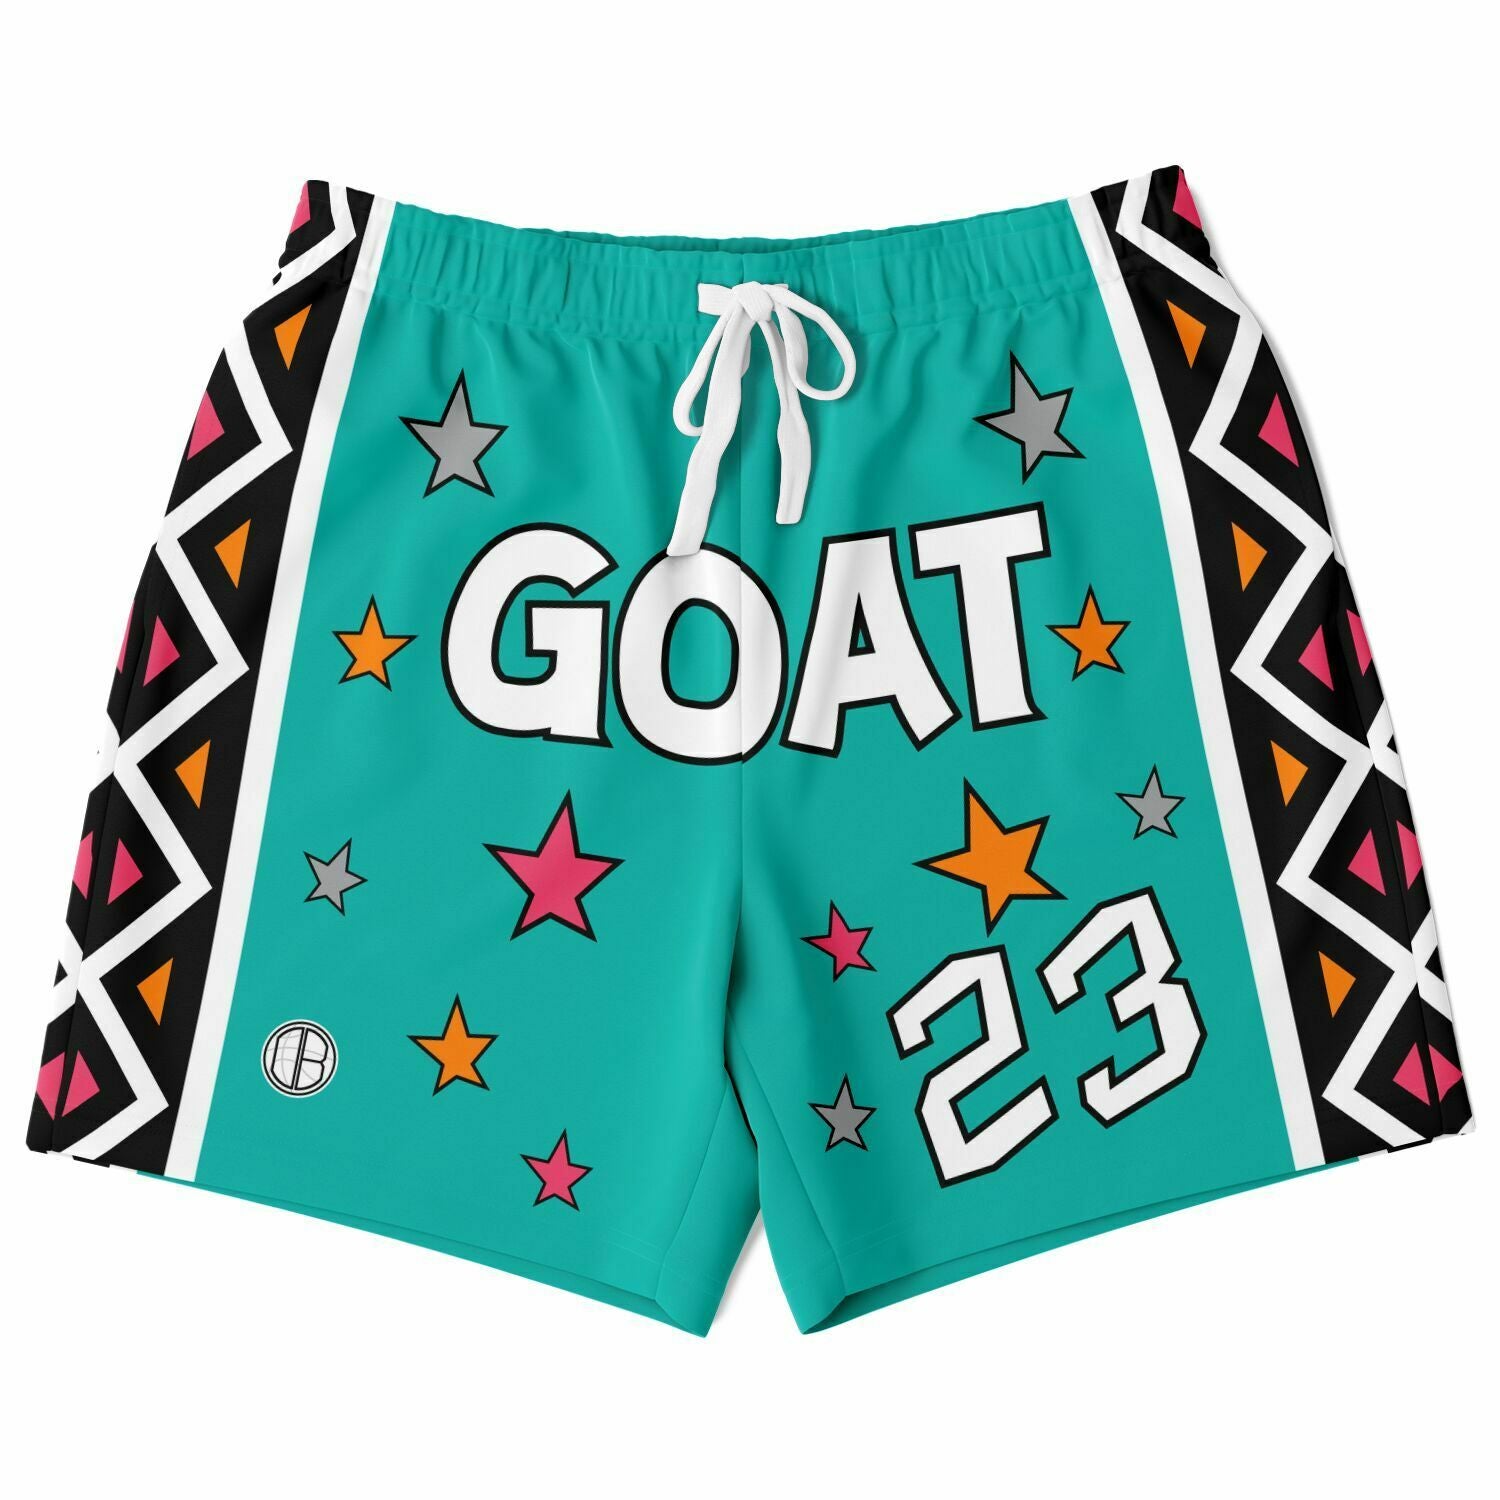 DEARBBALL SHORTS MESH LOS ANGELES - LA 24 8 INFINITY LIMITED EDITION ♾ -  DearBBall™